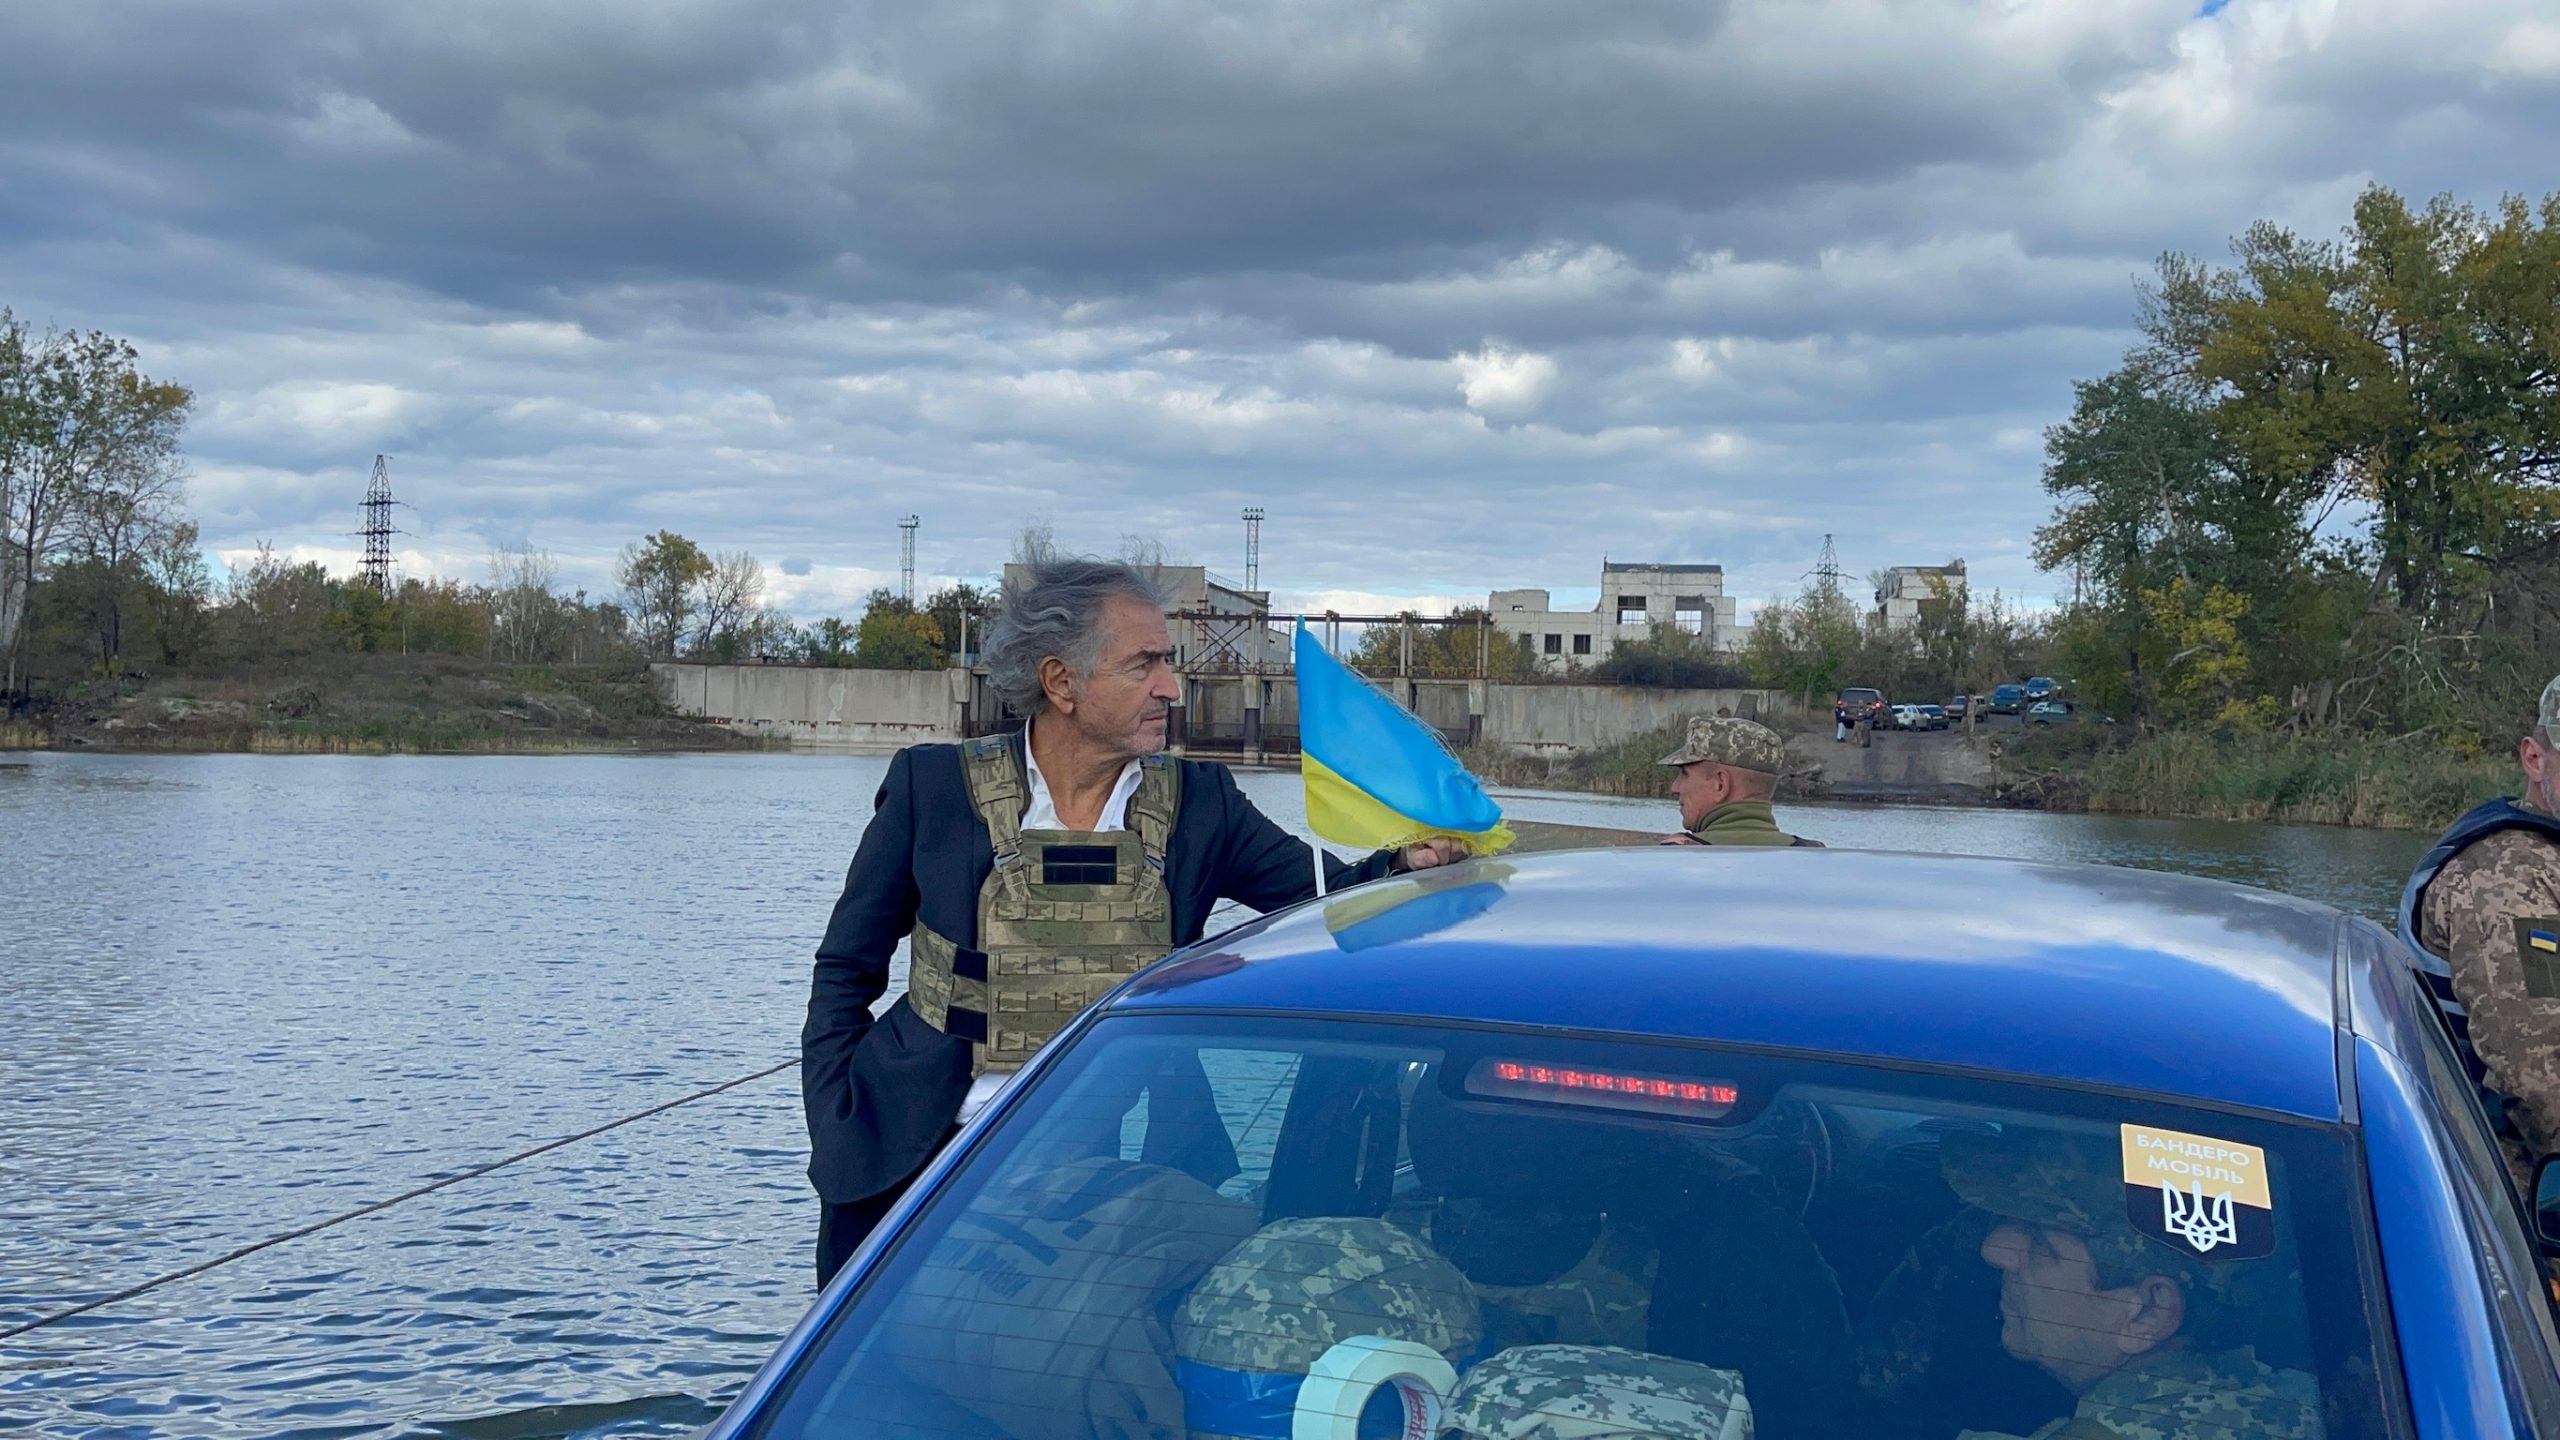 Crossing the Donets River on a steel barge for Bernard-Henri Lévy and the Ukrainian military.